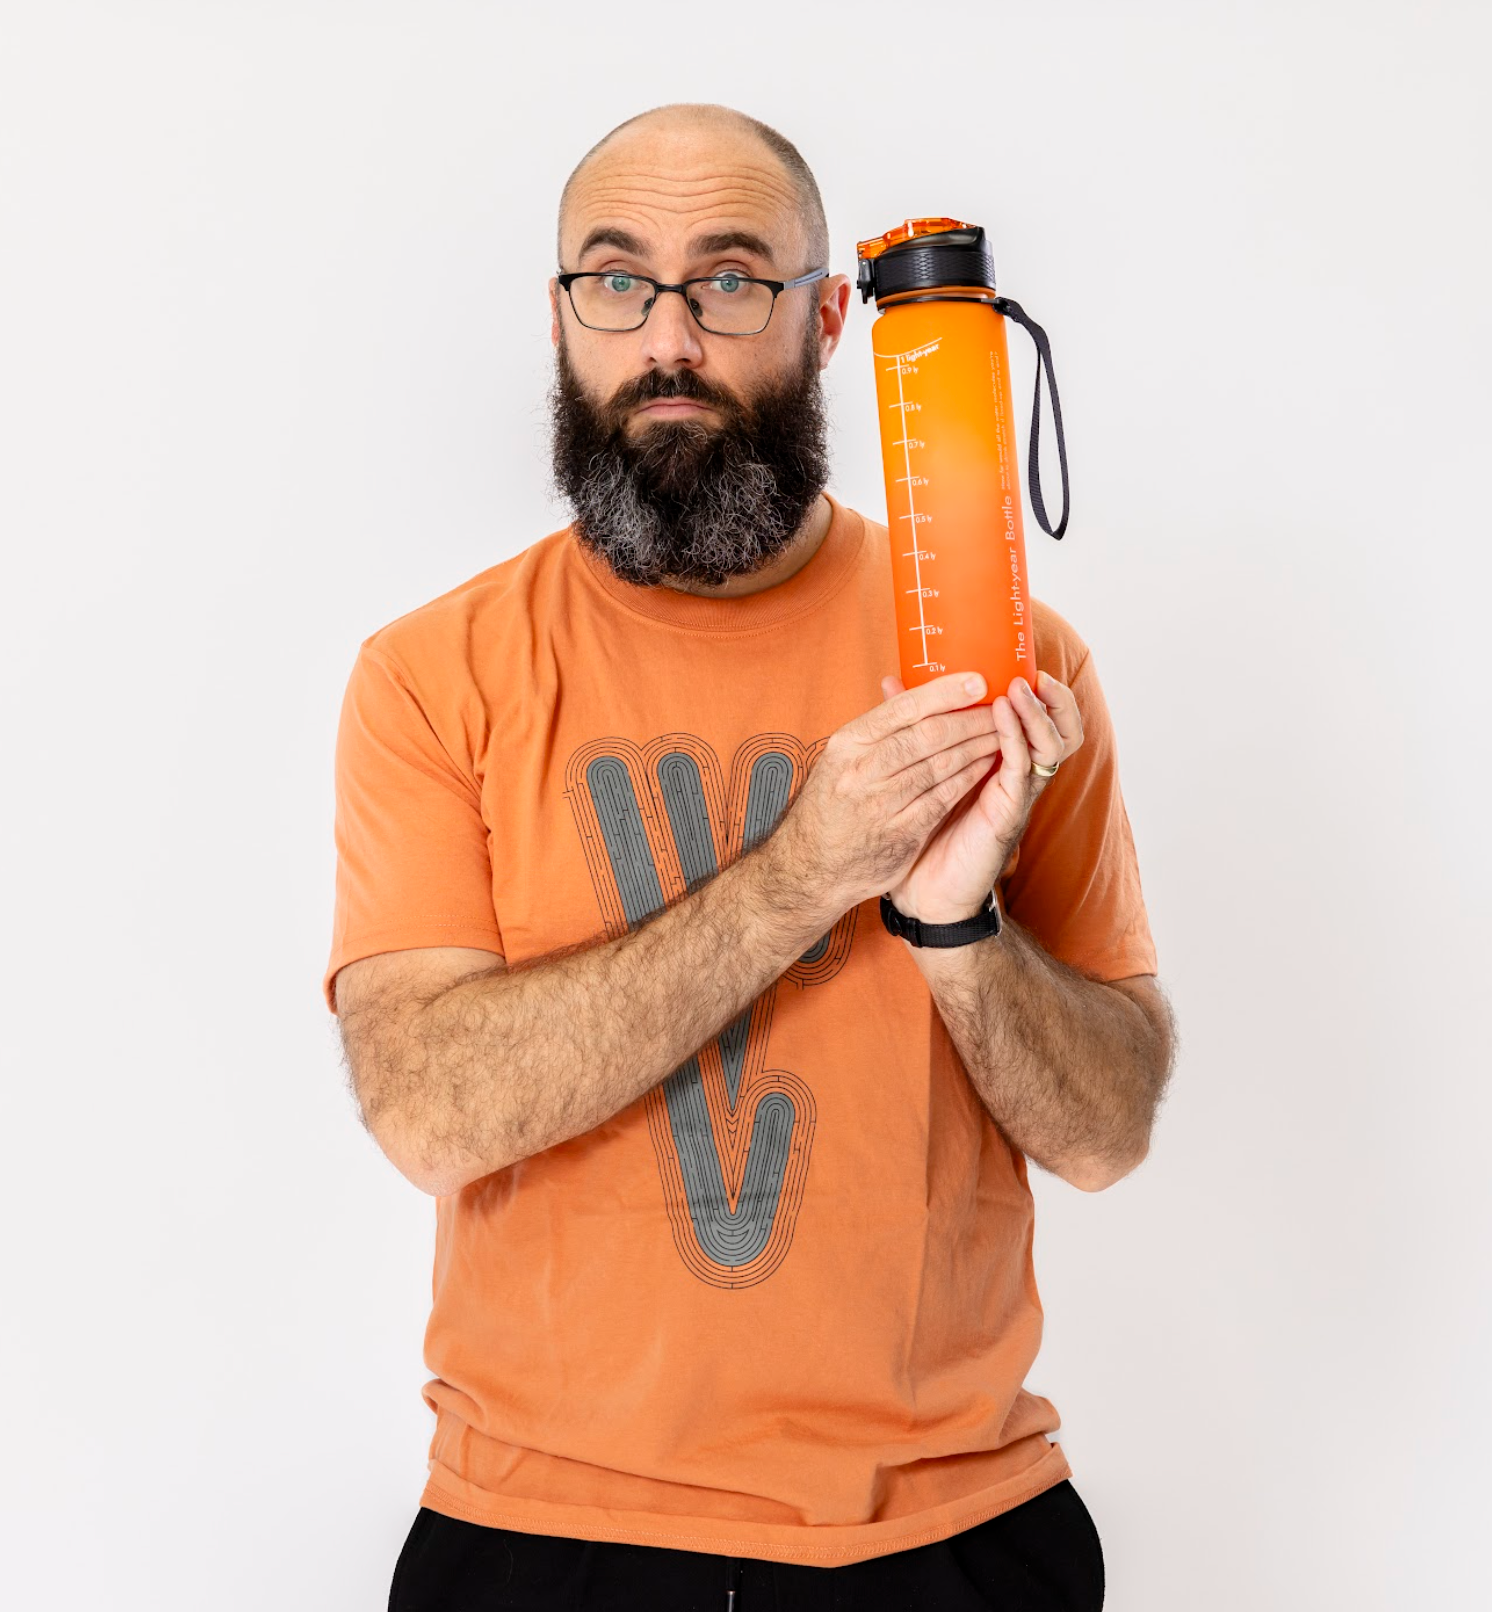 The Light-year Water Bottle